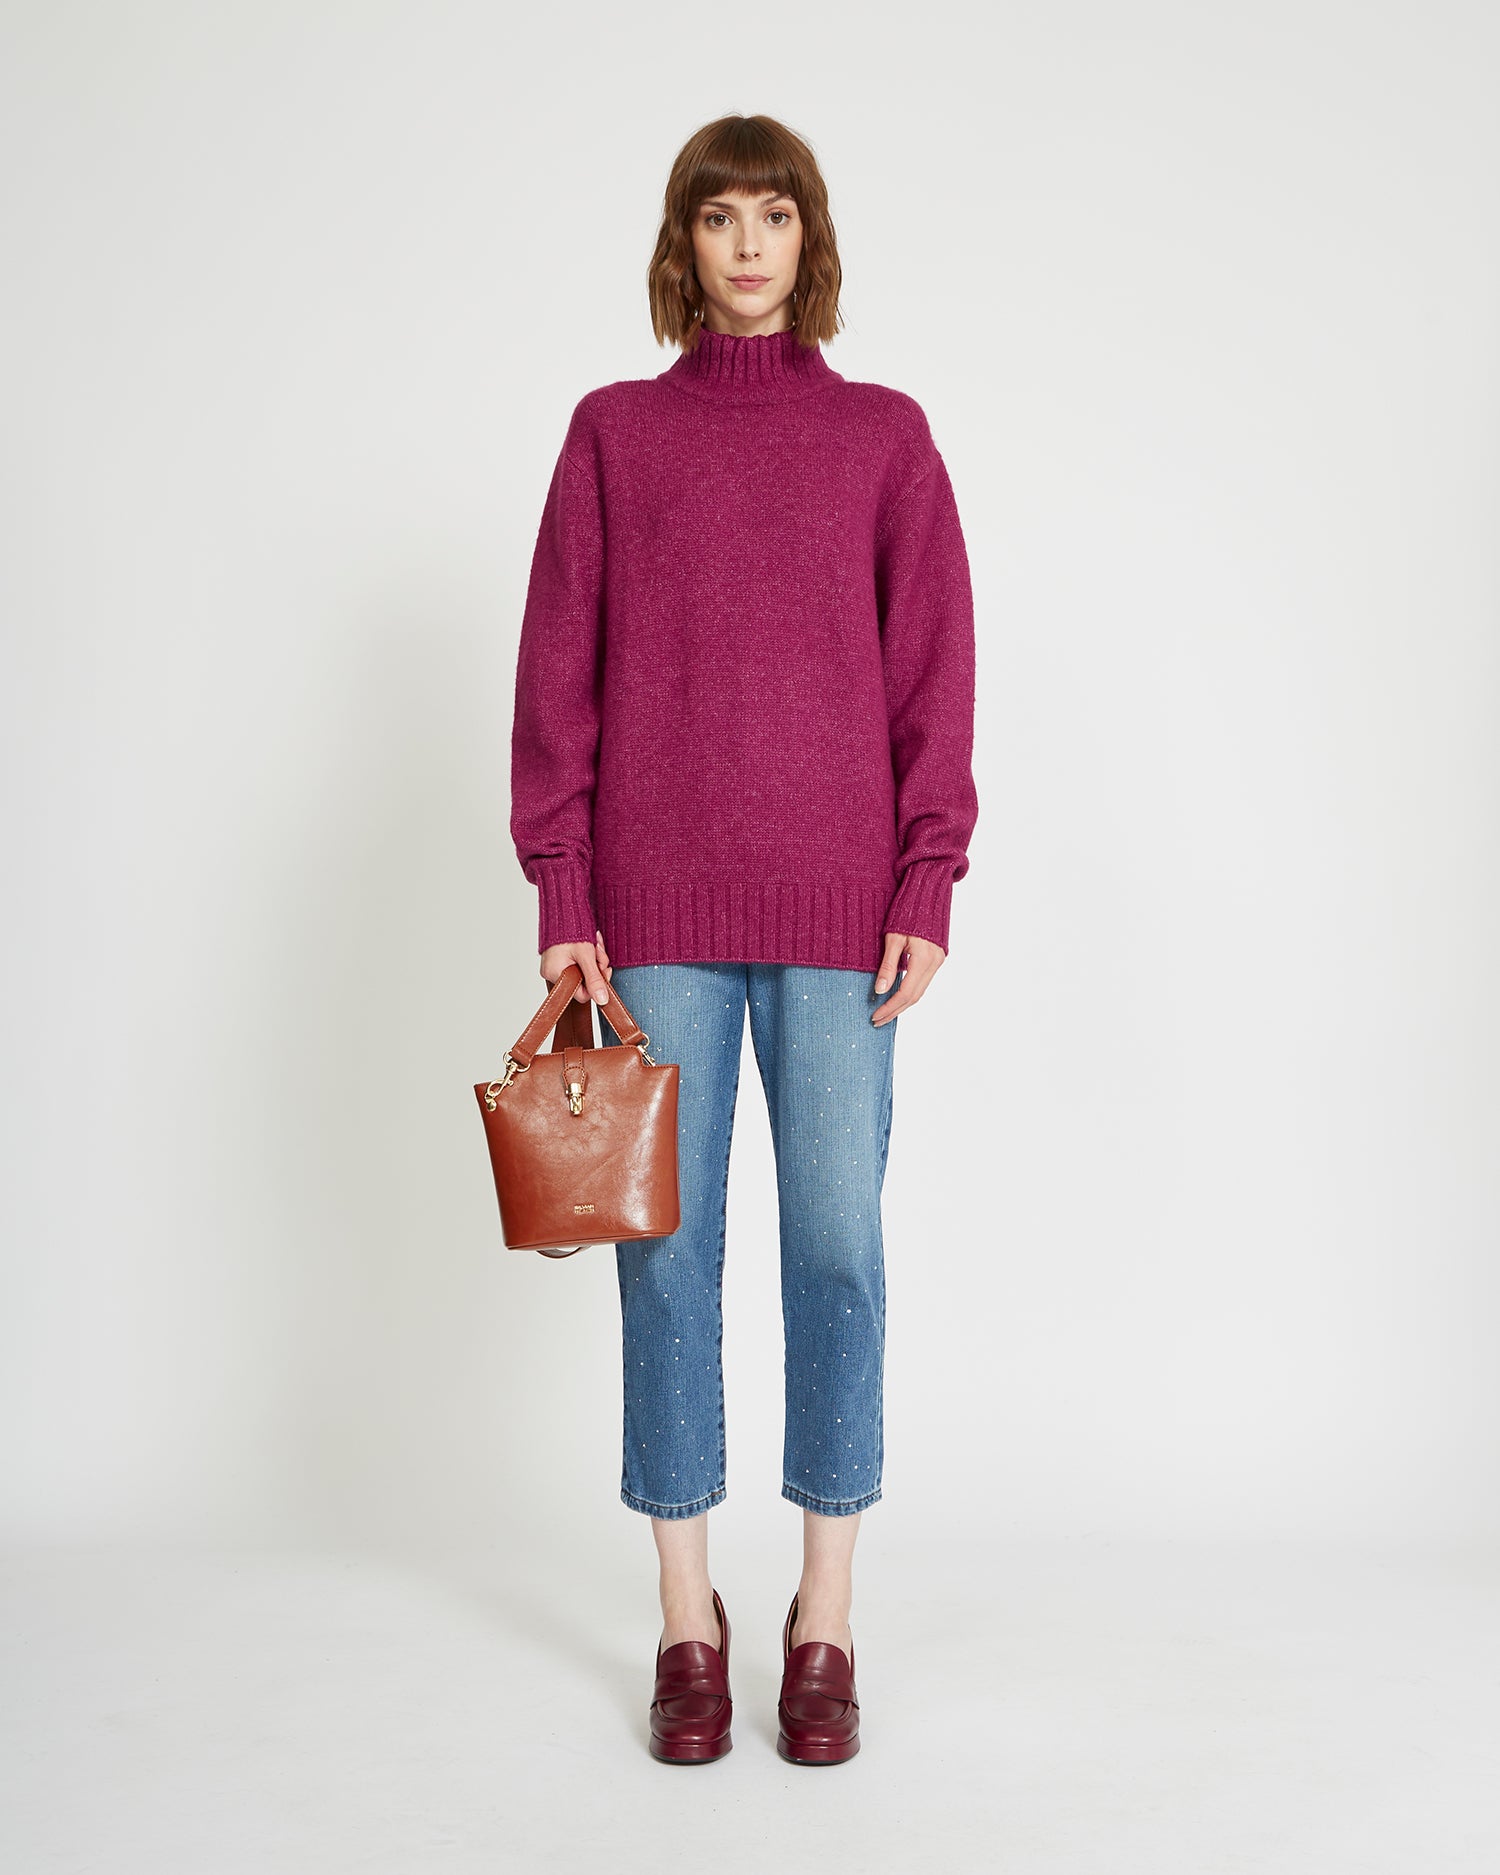 Over sweater with puff sleeves